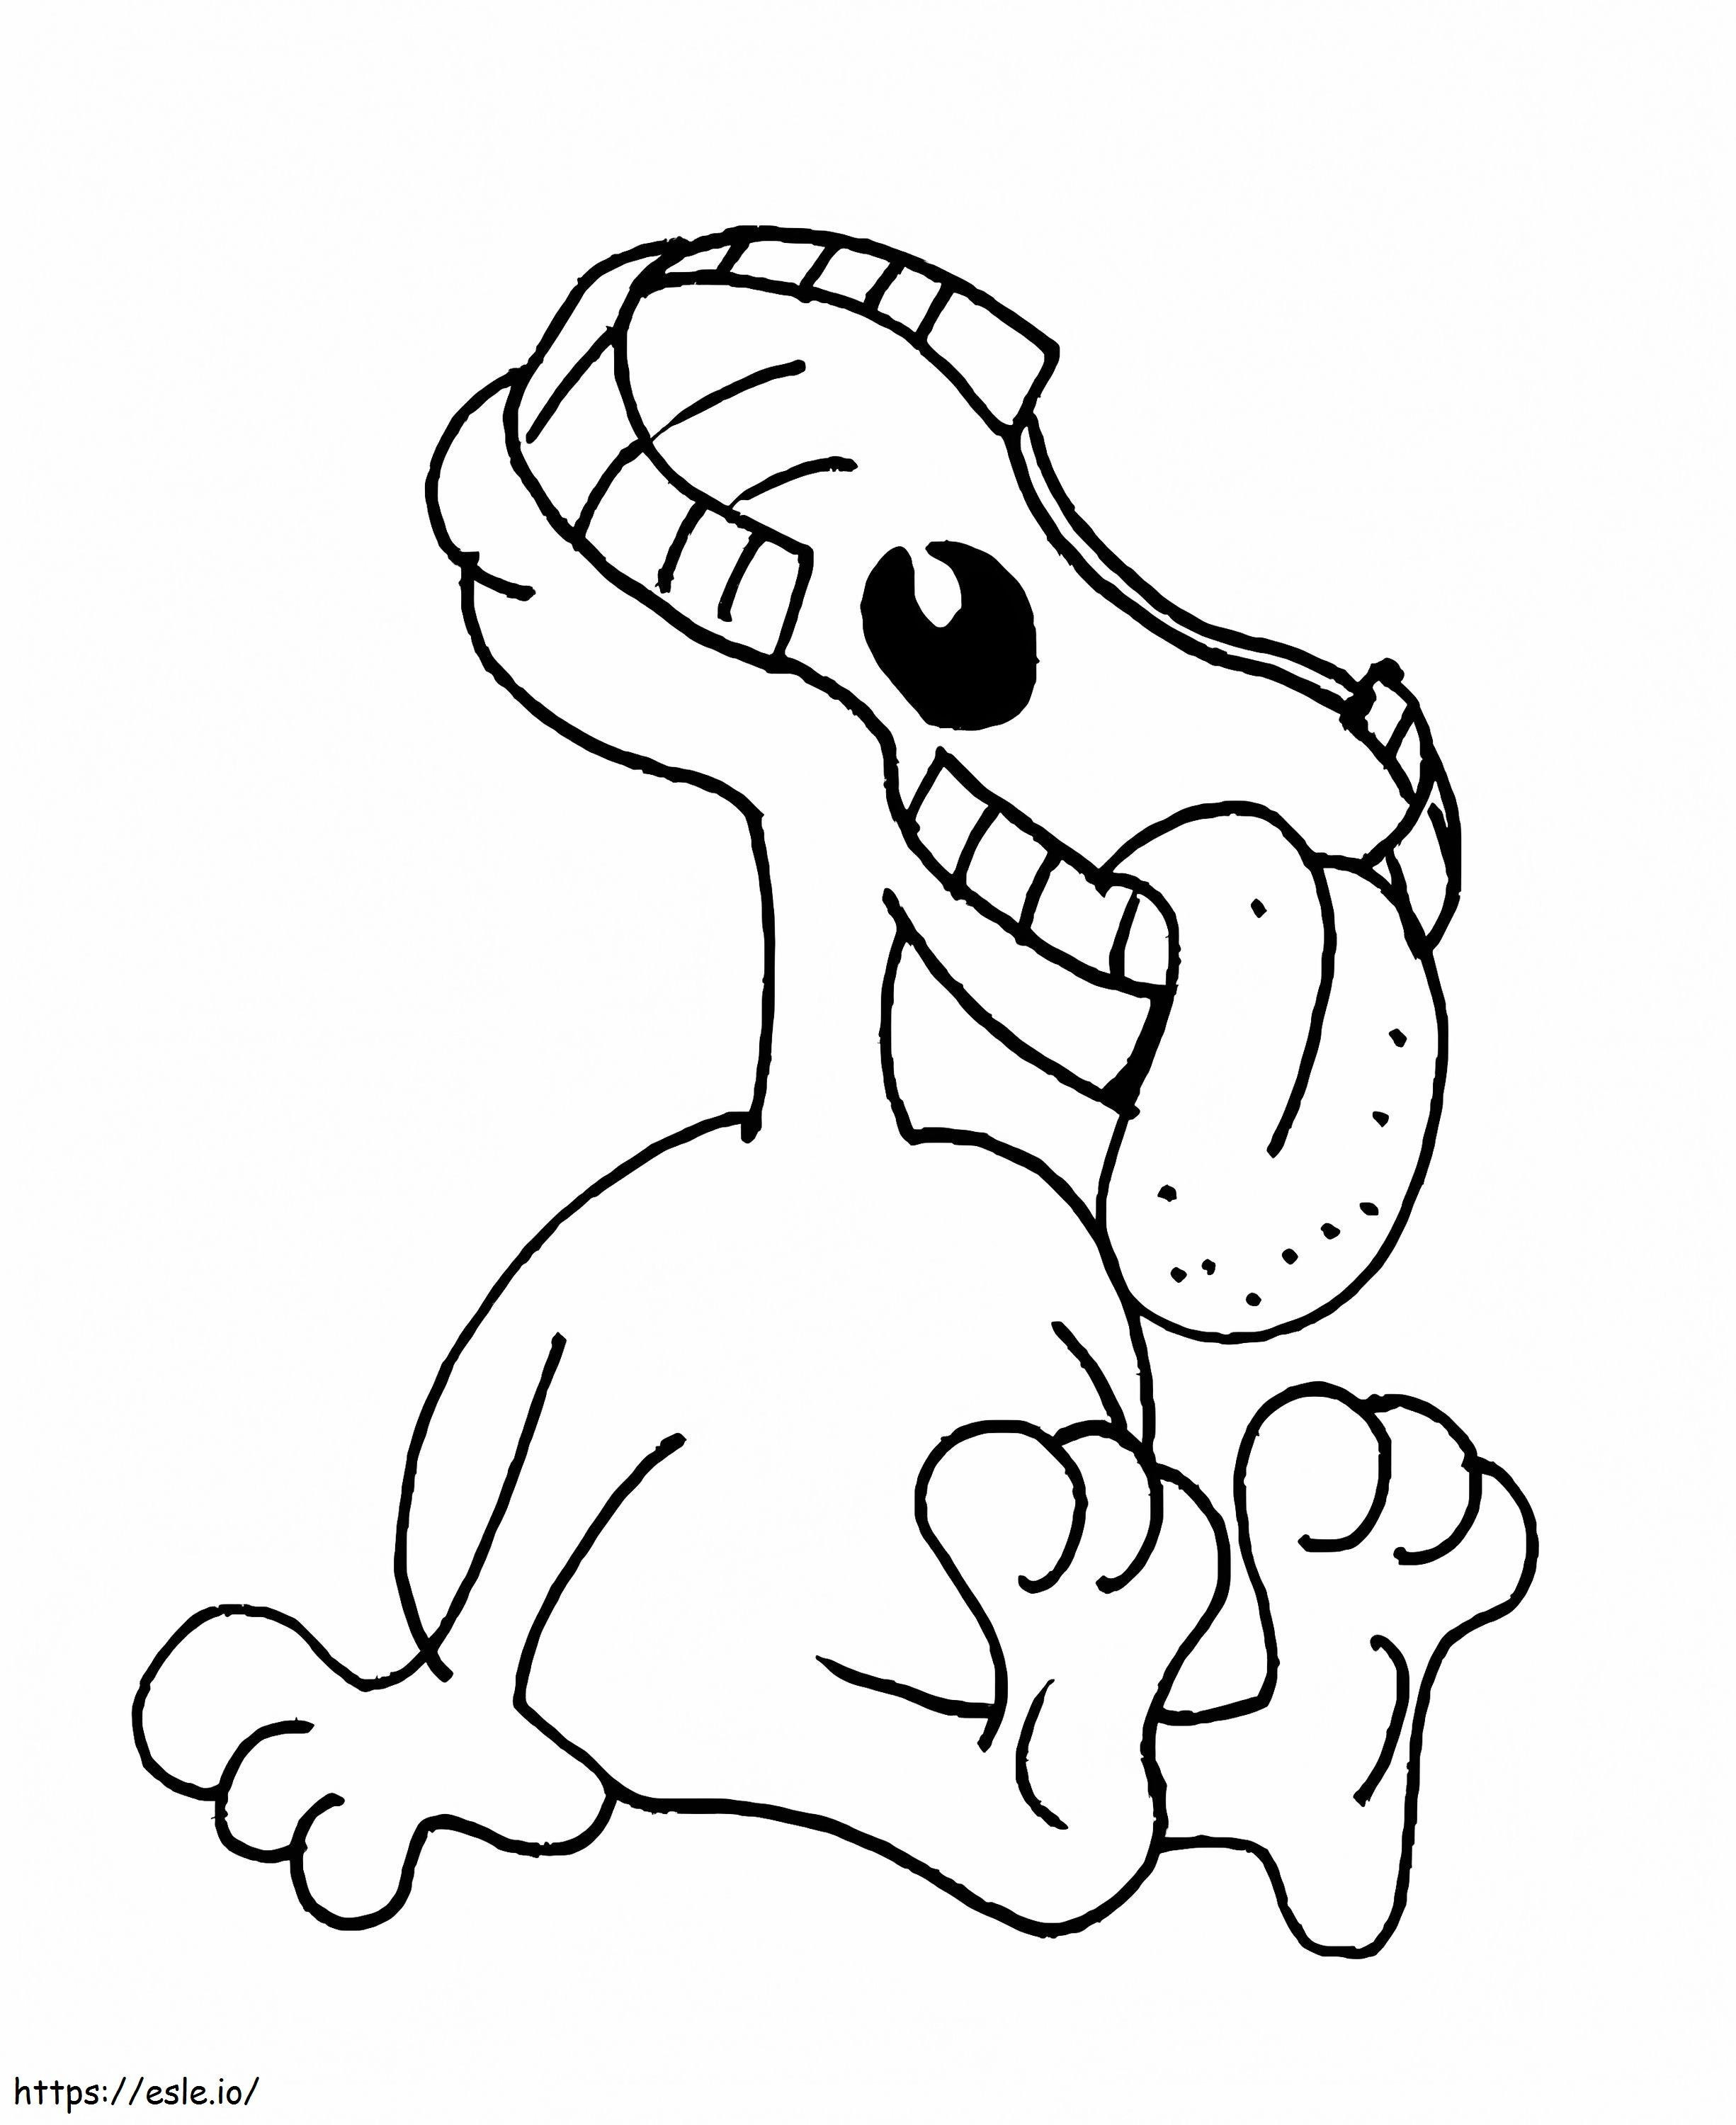 Big Mouth Creatures coloring page